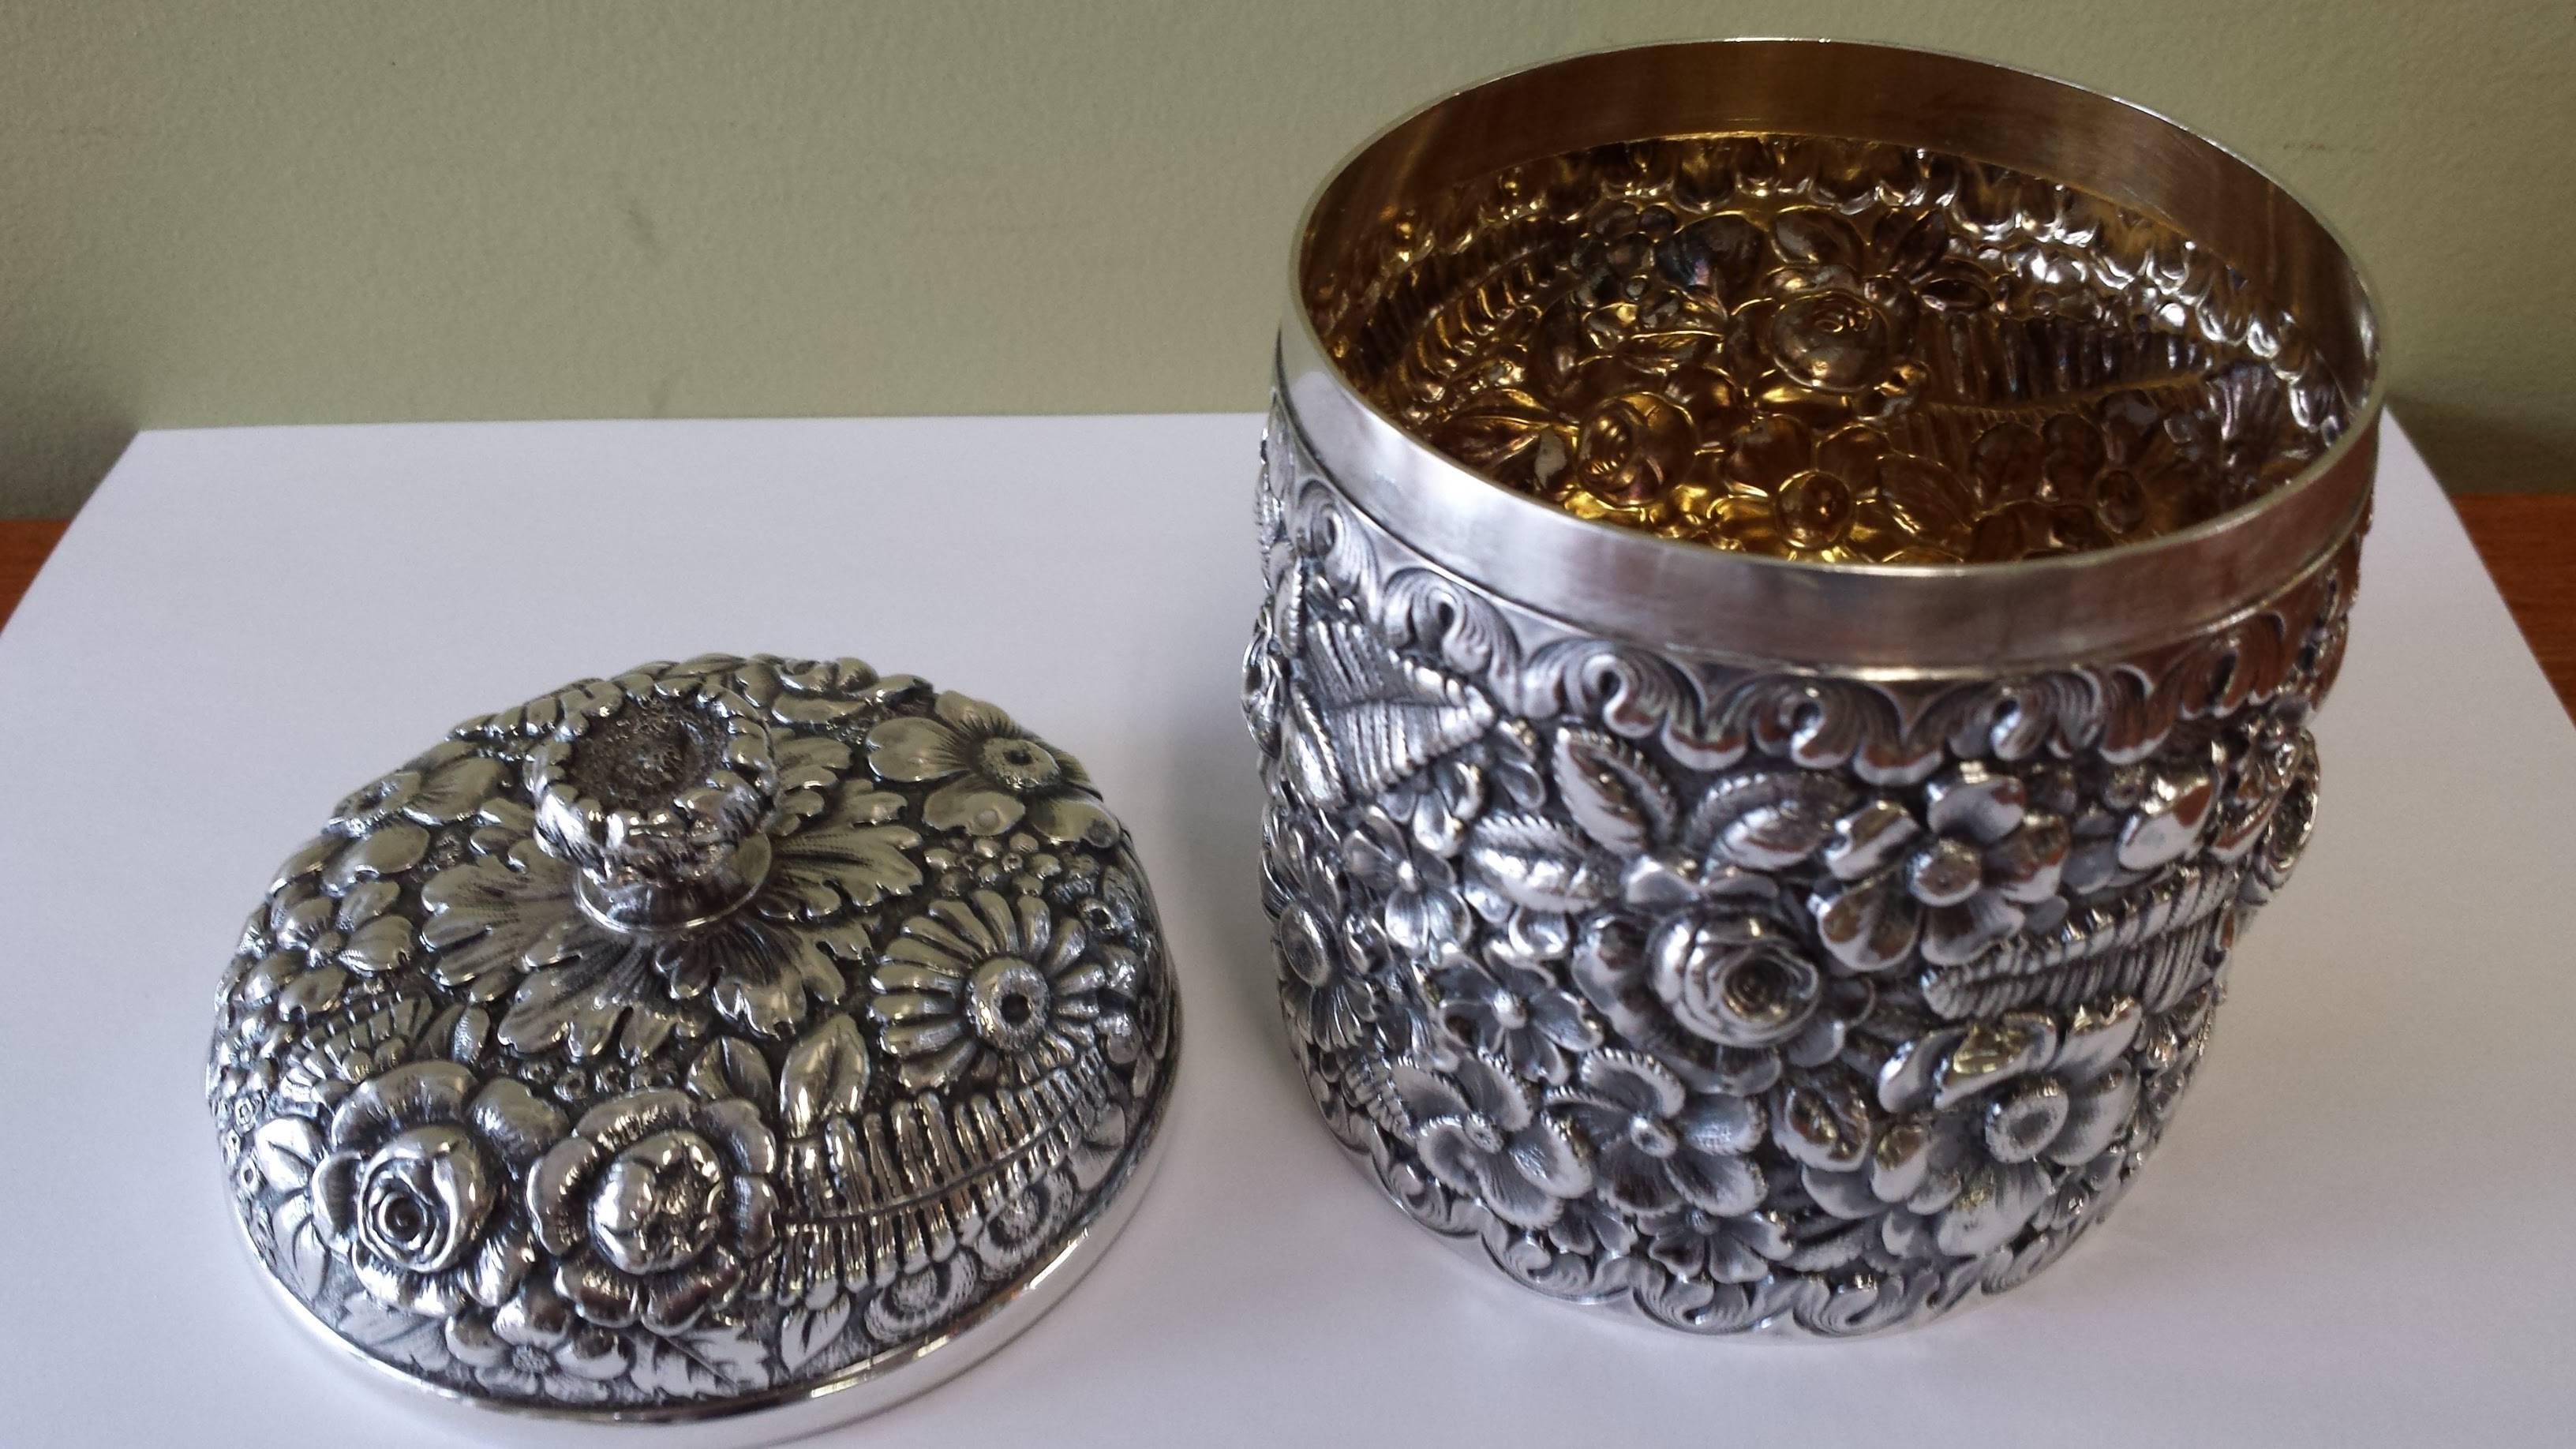 20th Century Tiffany Sterling Silver Covered Dresser Jar with a Gilt Interior